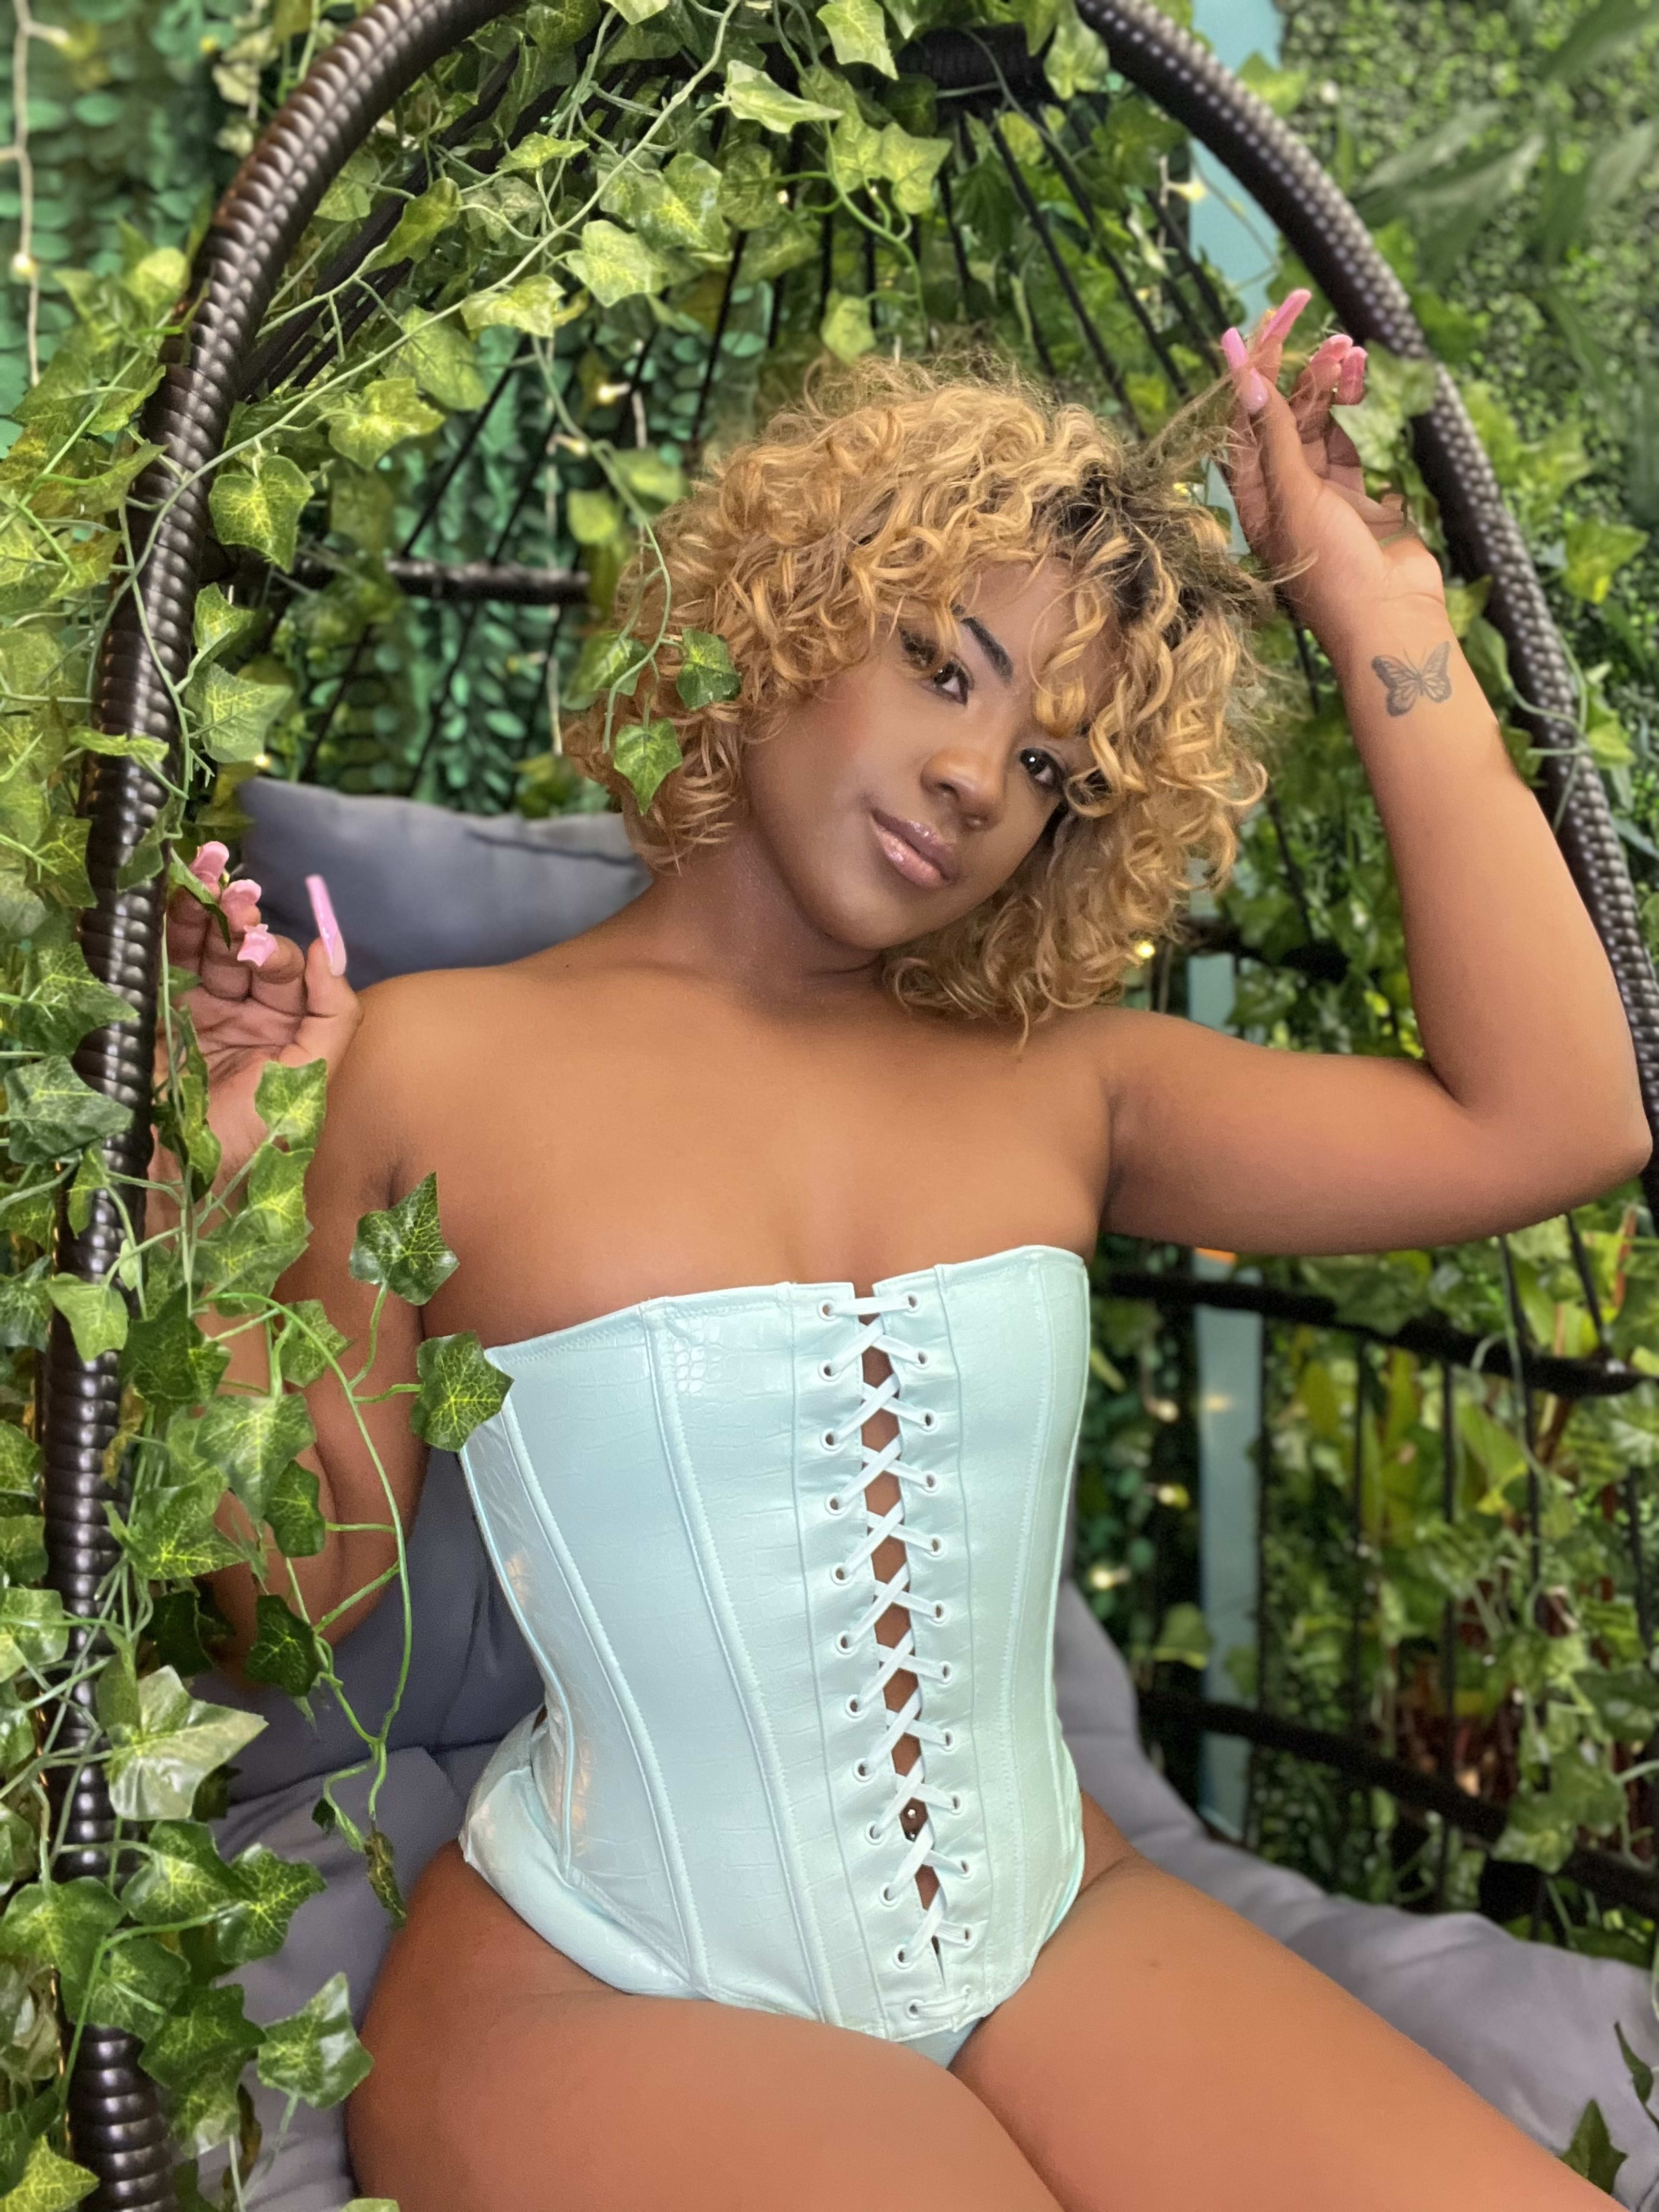 A fashion model in a light blue corset posing outdoors amidst plants.